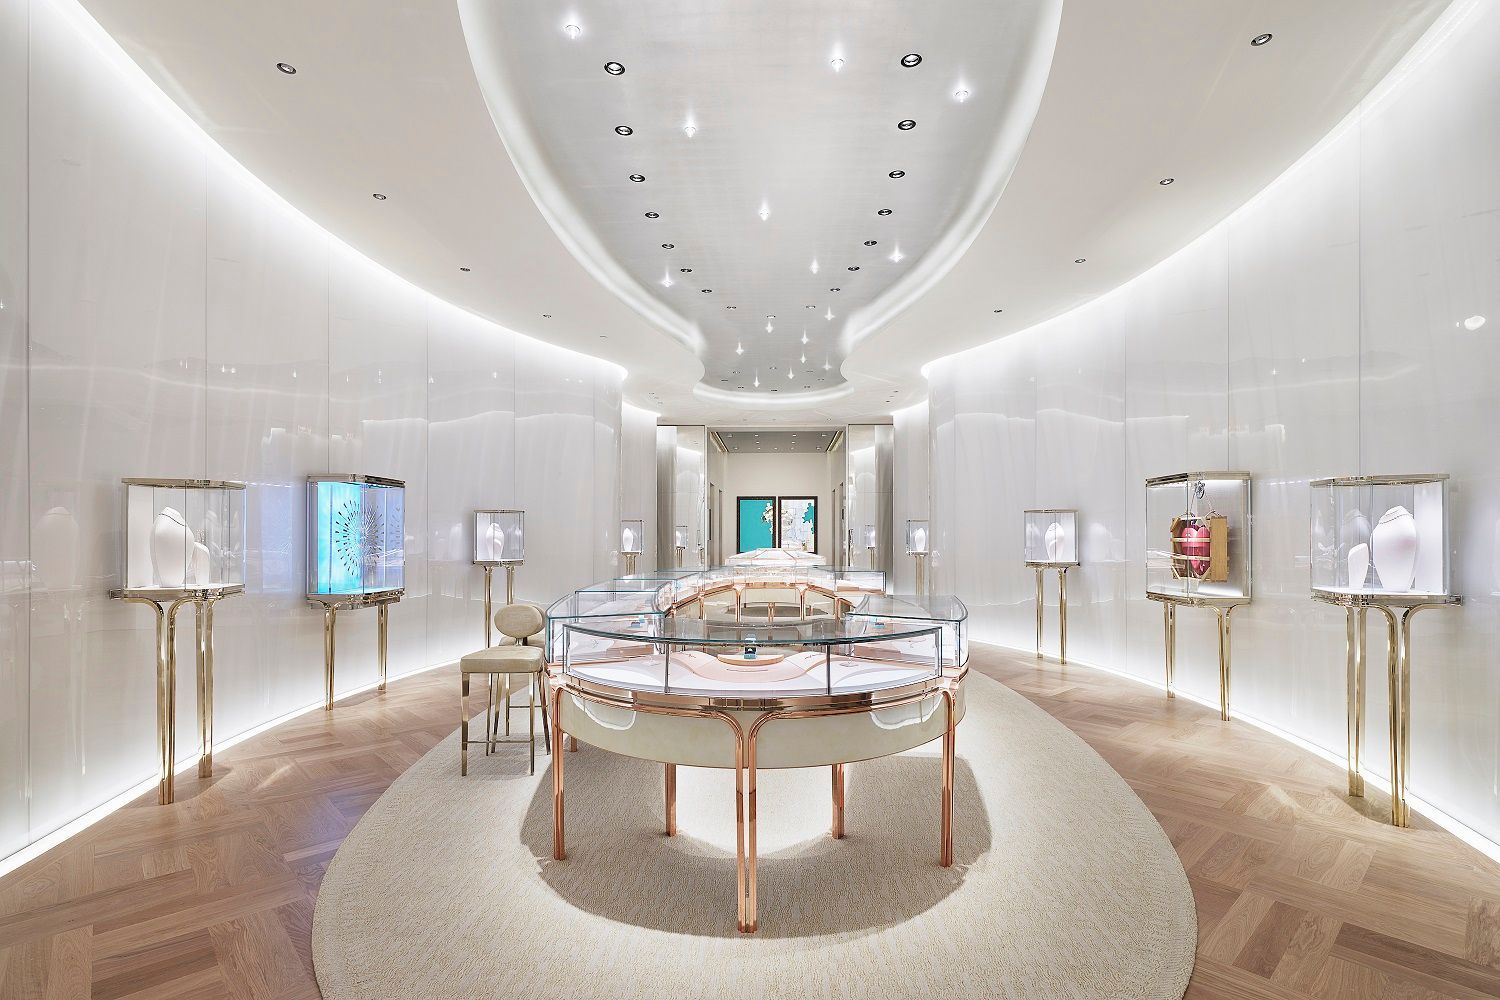 Tiffany & Co. unveils The Landmark, its redesigned flagship store